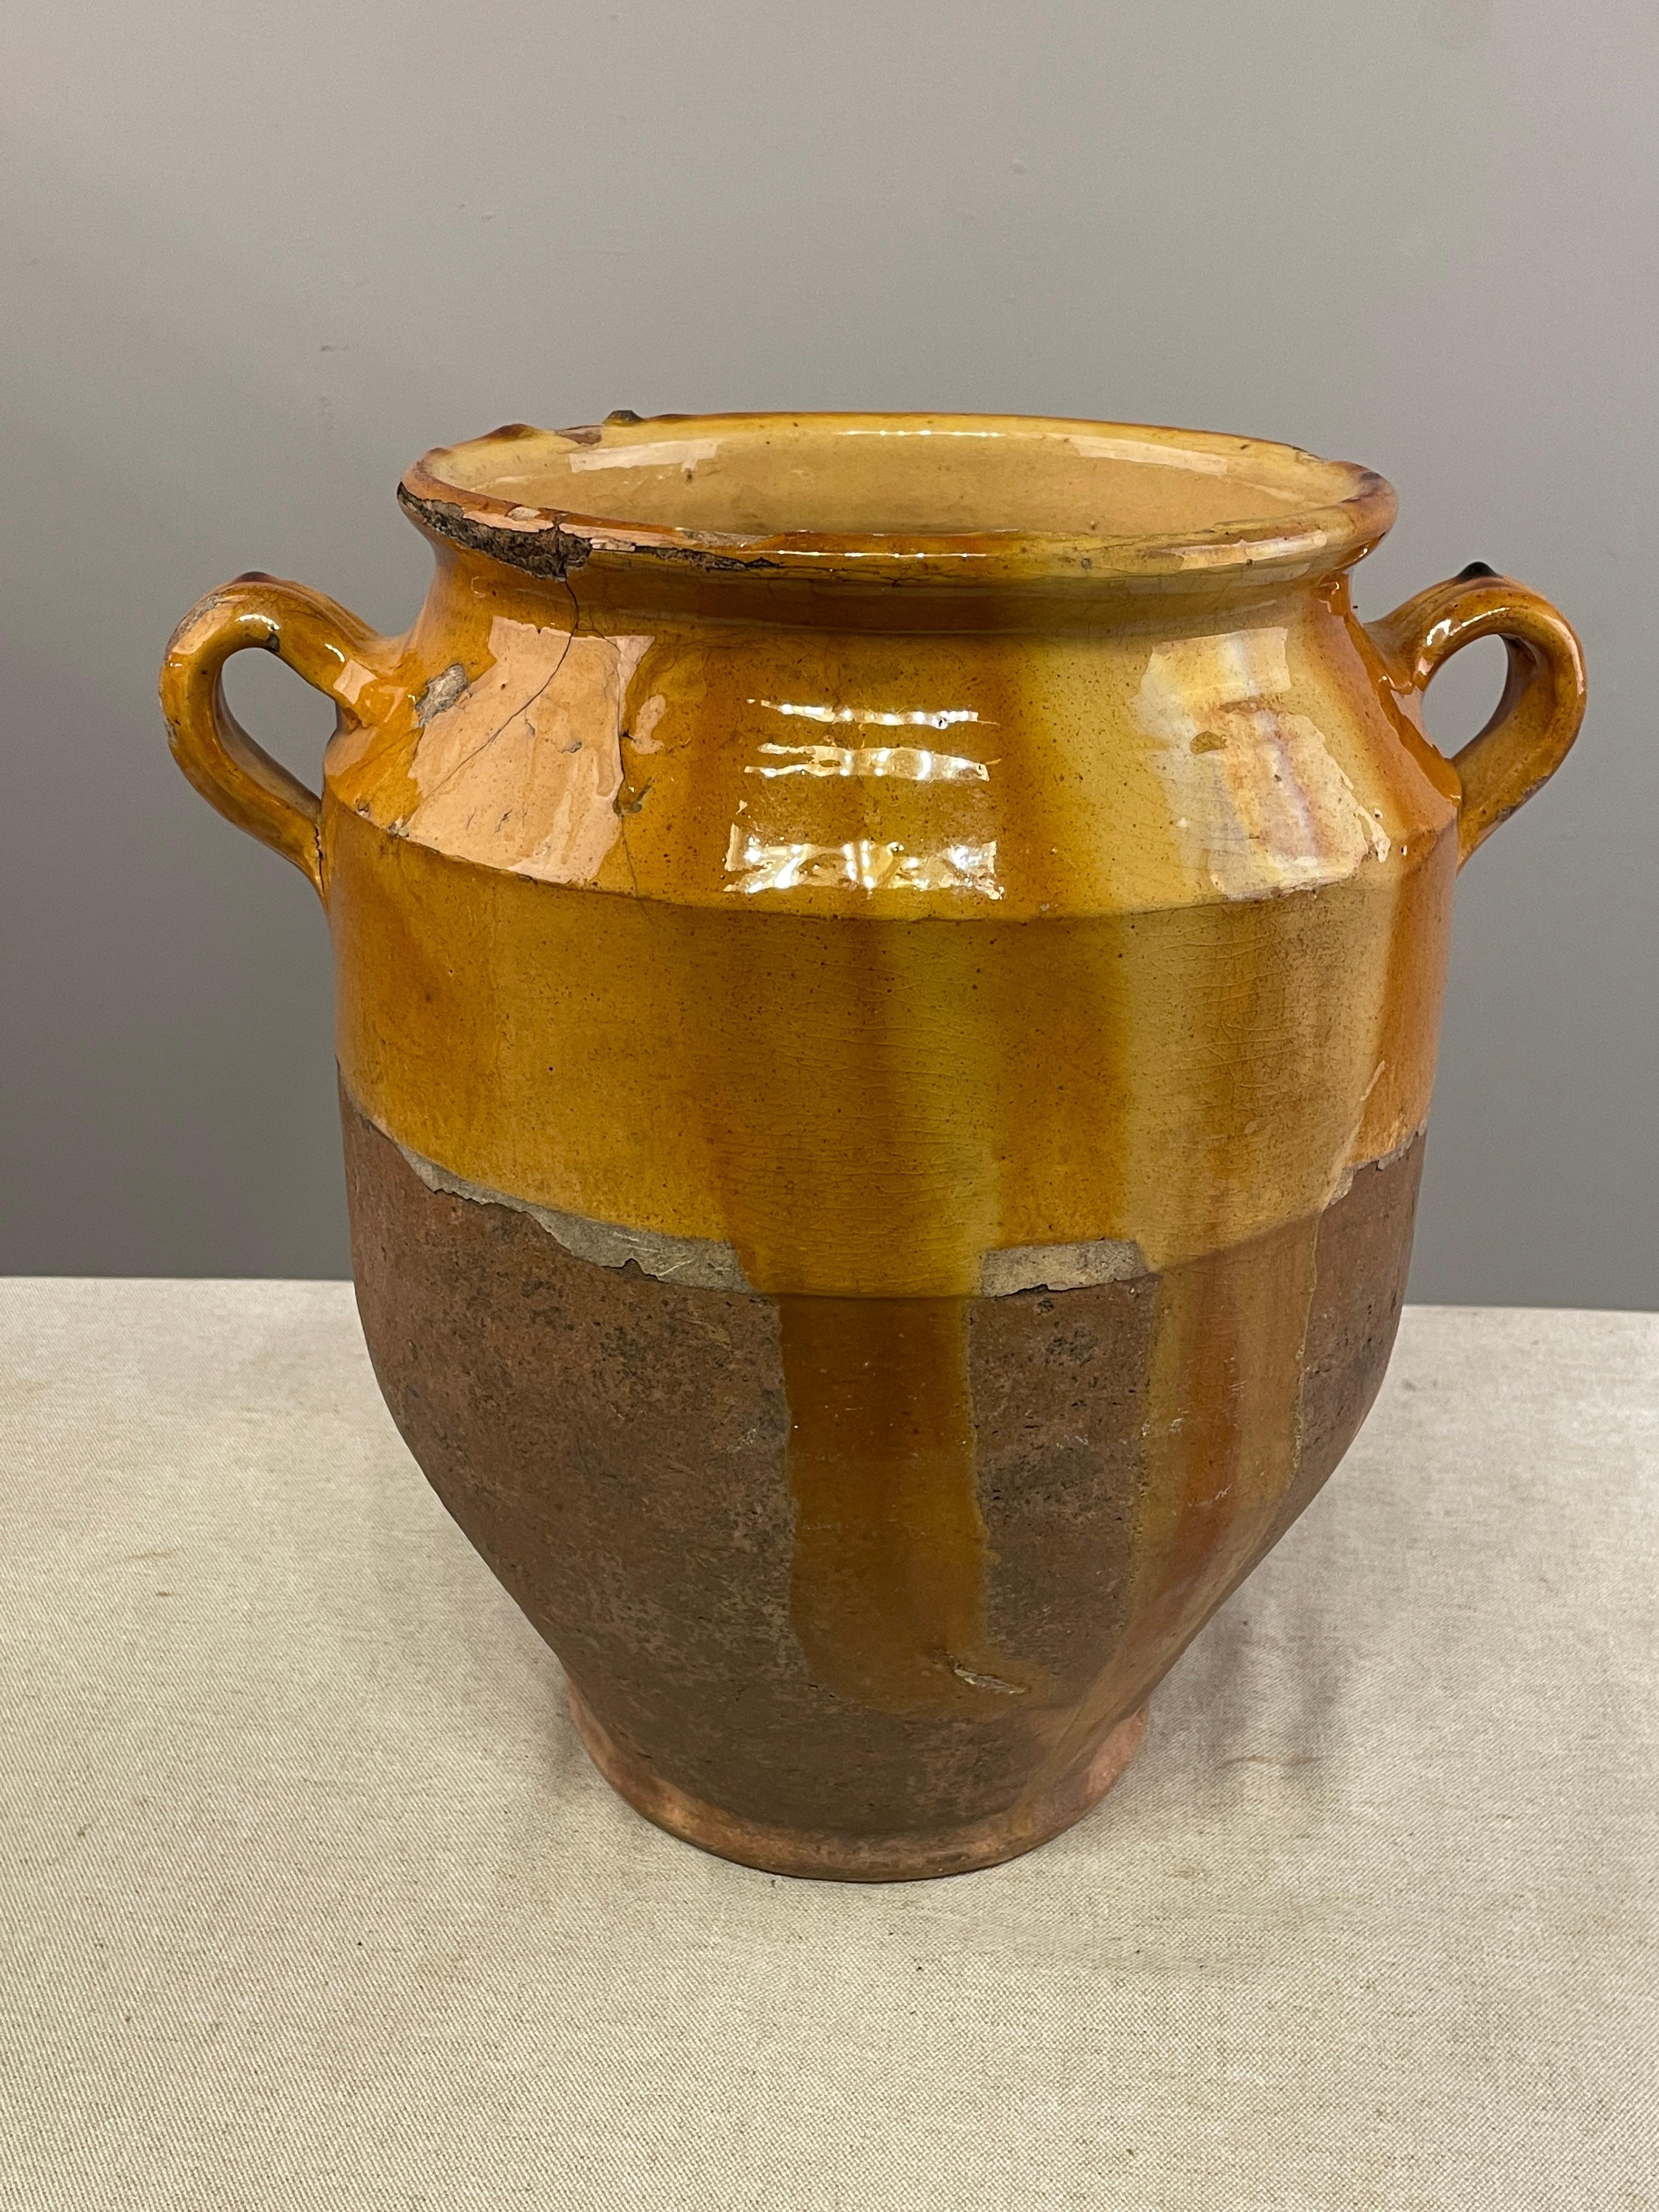 A large earthenware confit pot from the Southwest of France with traditional yellow, ochre glaze. One of the tallest I have ever seen at 14